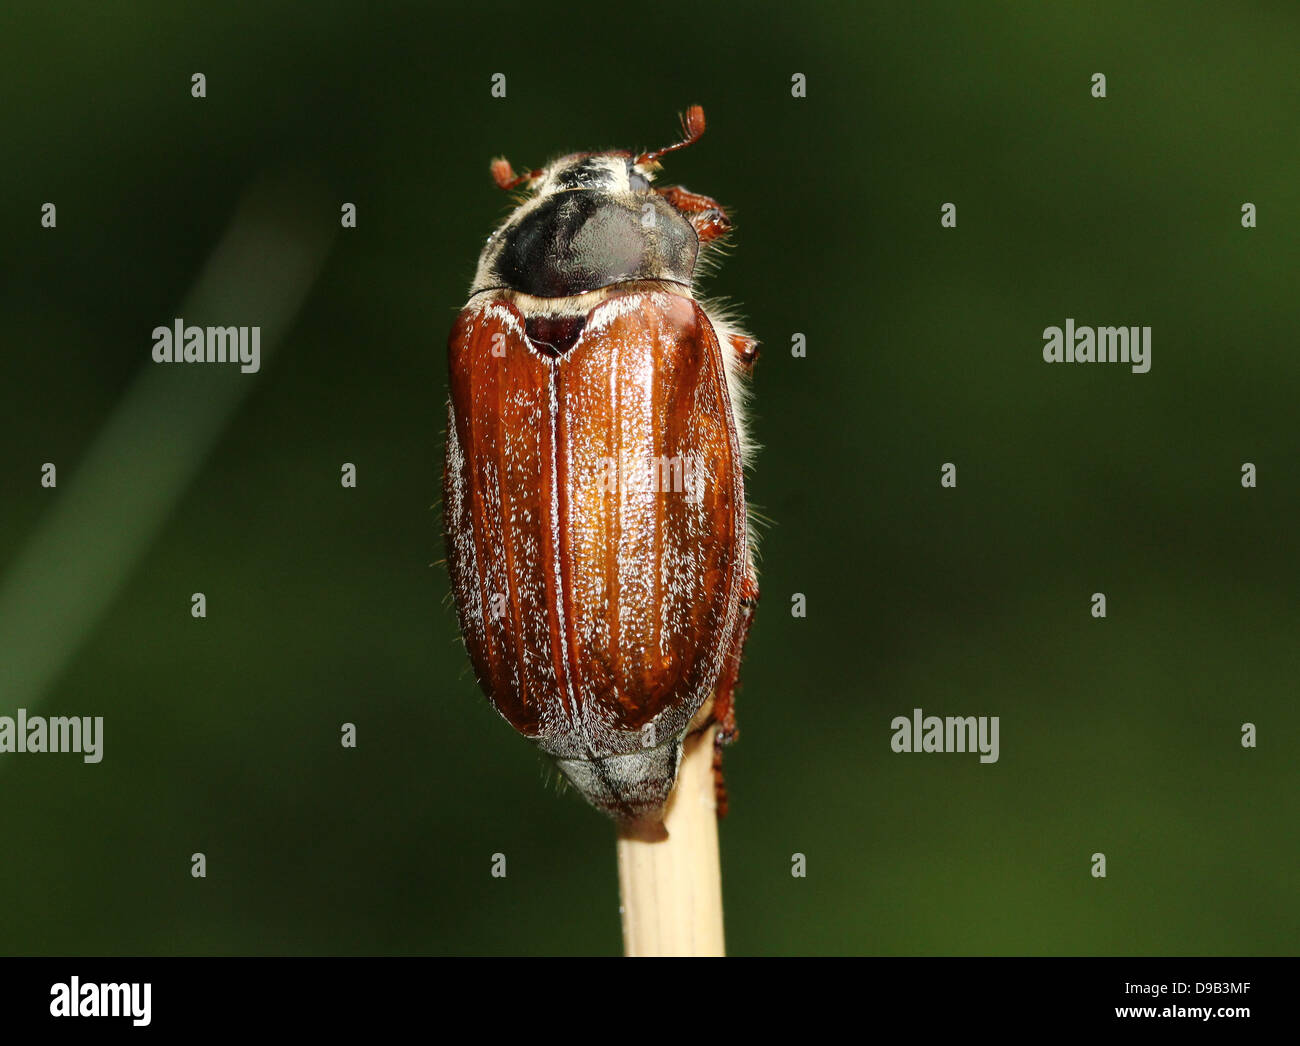 Very detailed close-up of a male Cockchafer a.k.a. May Bug (Melolontha melolontha) Stock Photo